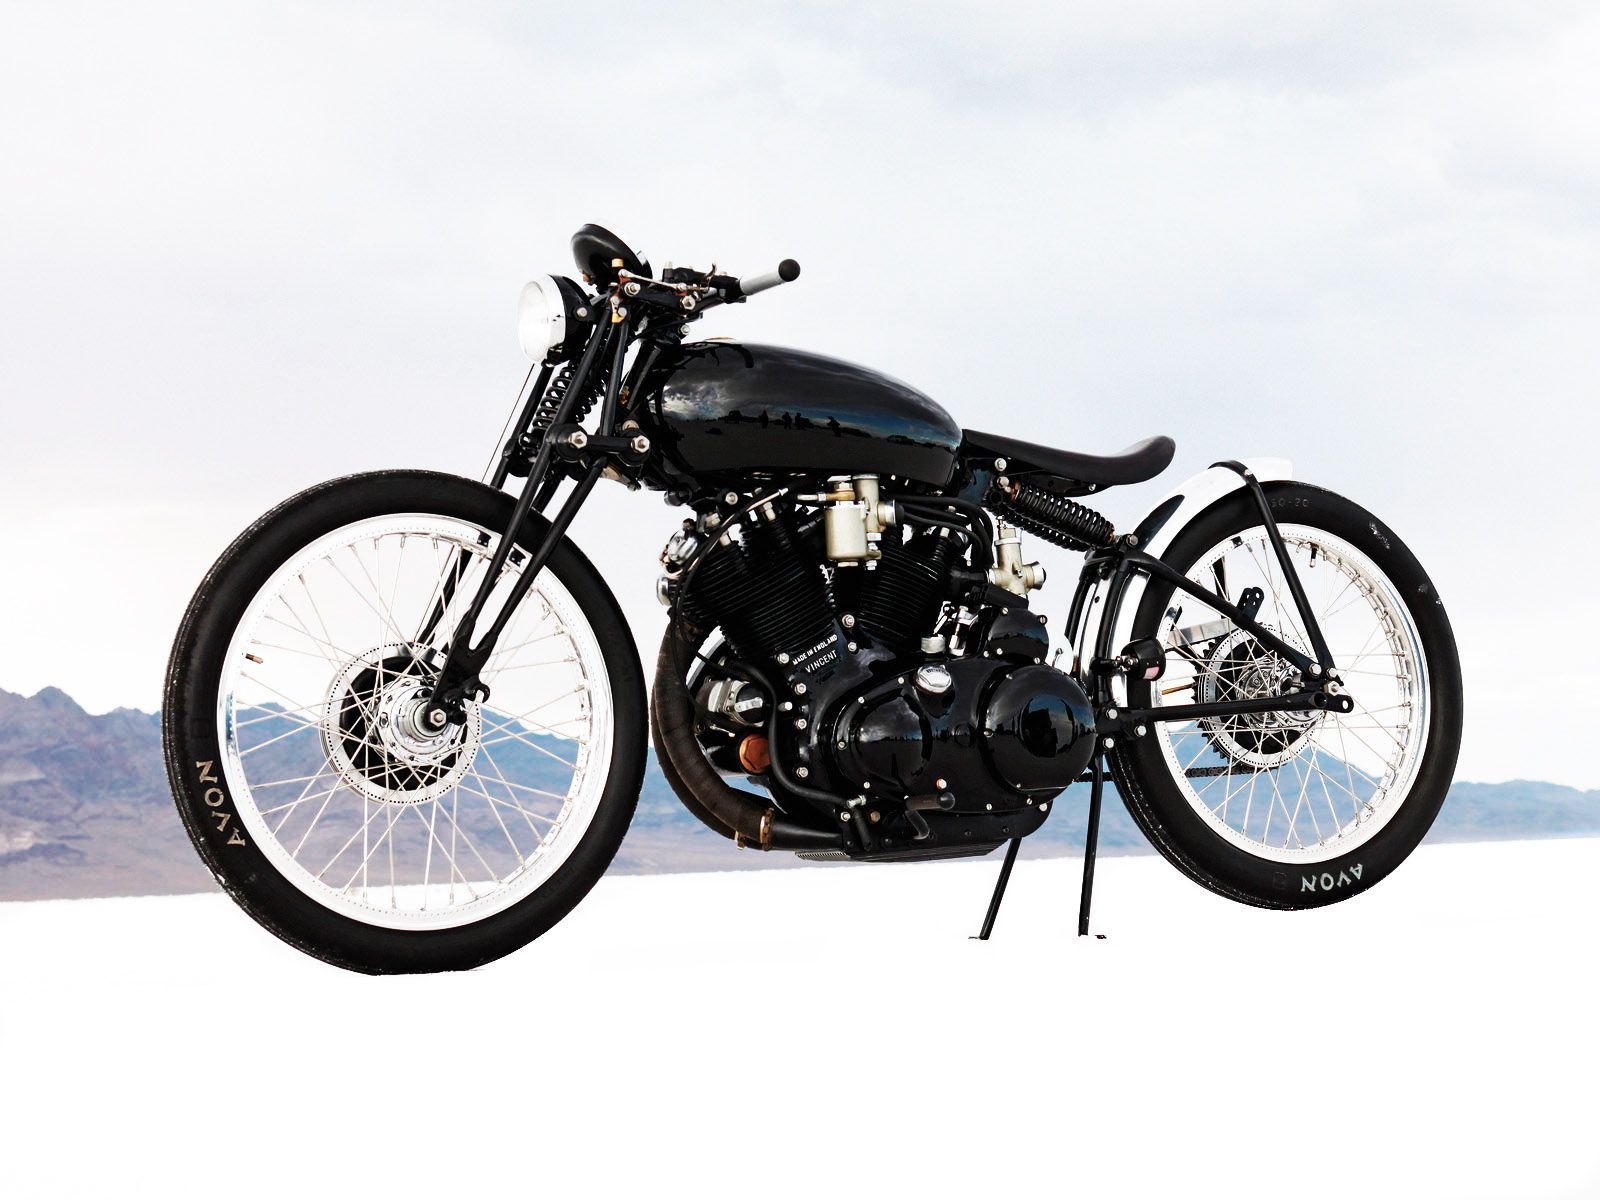 1952 Vincent Black Shadow; one of the later Vincent racers